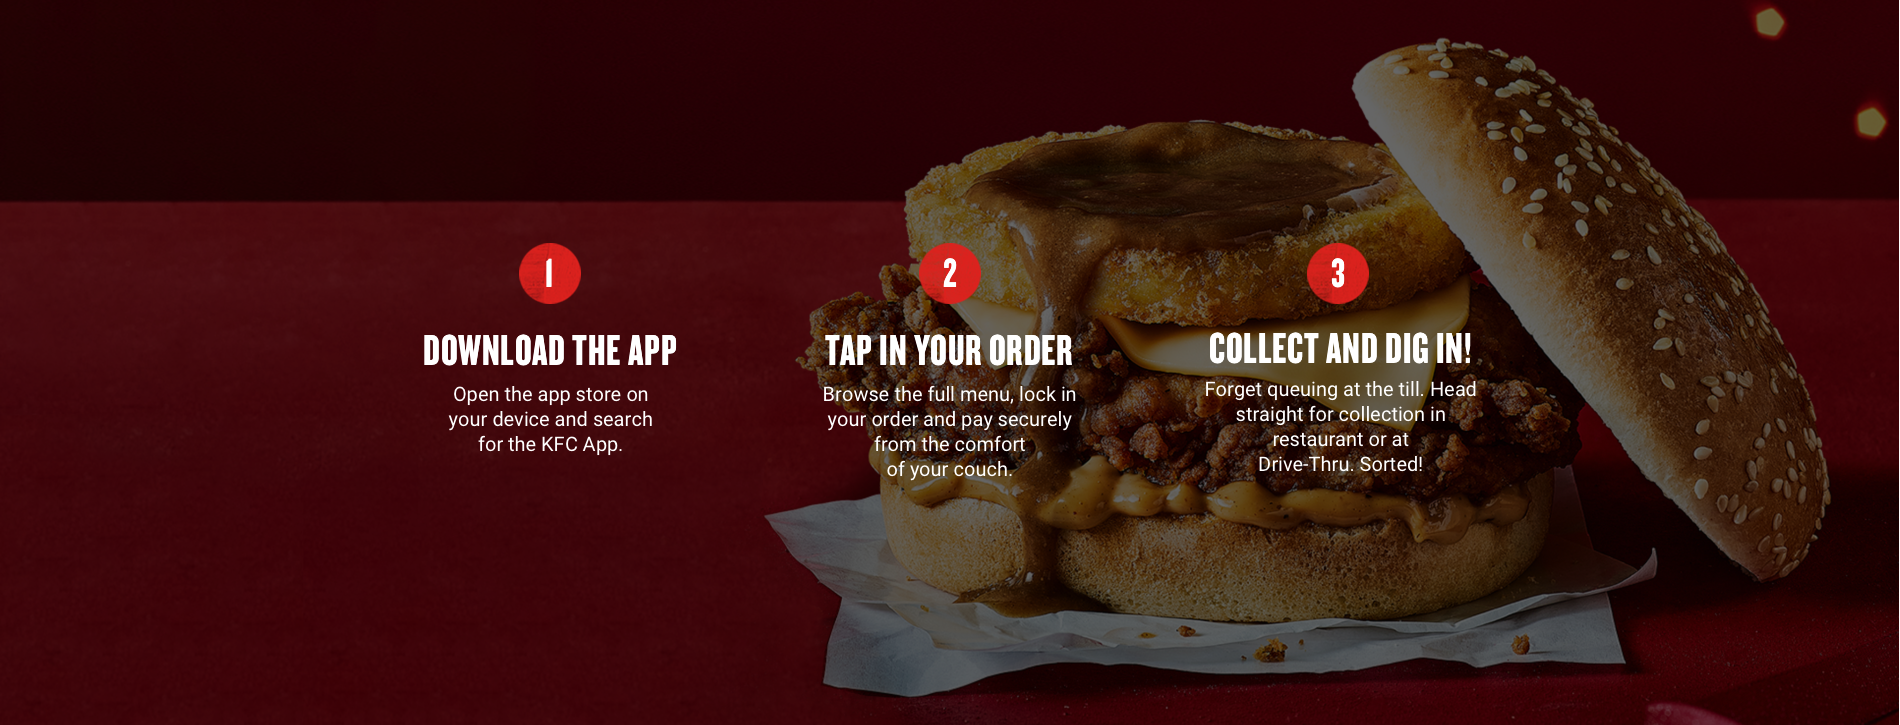 Mobile Ordering with the KFC App